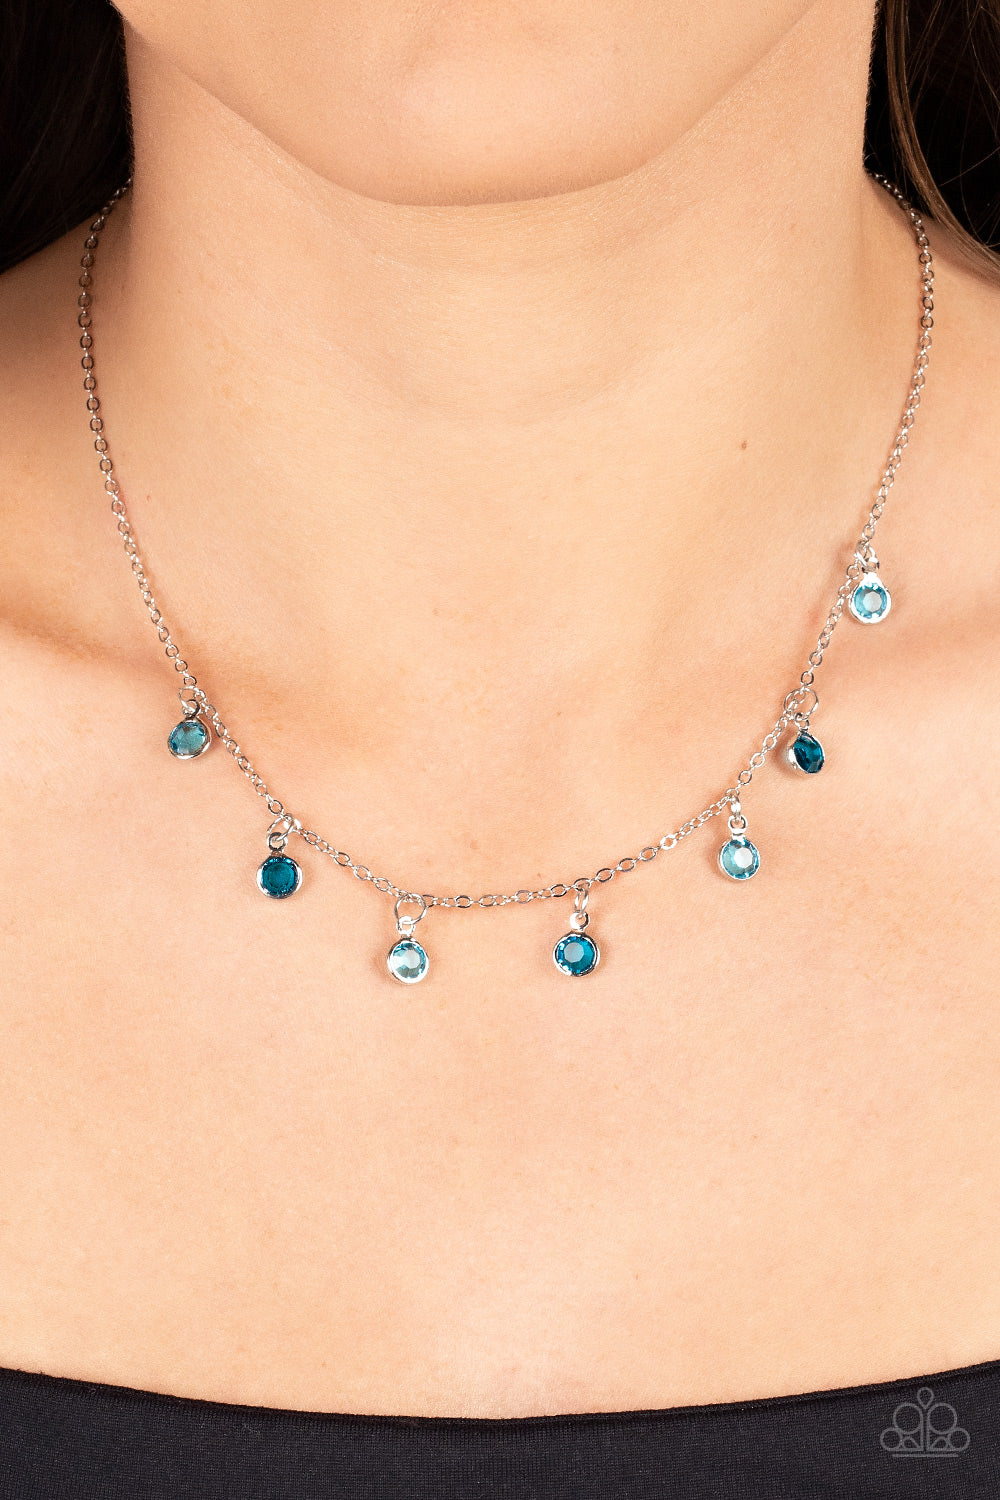 Paparazzi “Carefree Charmer” - Blue Necklace Earrings Set